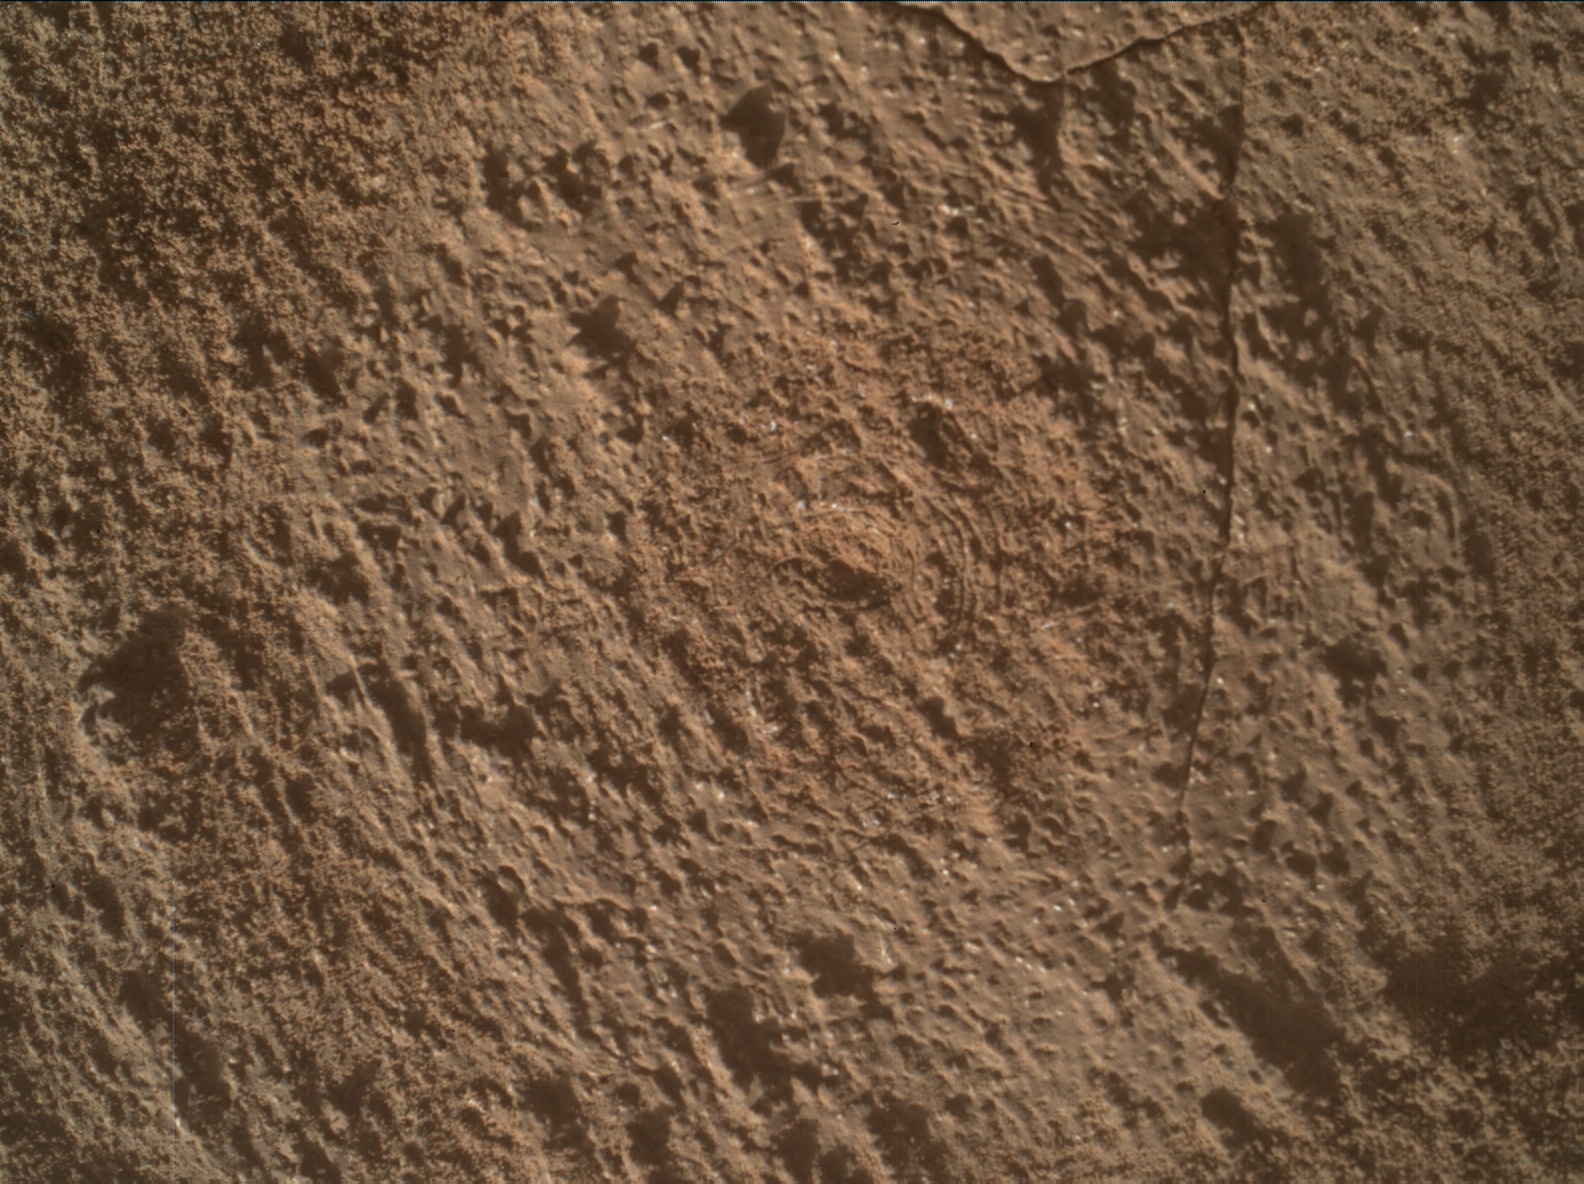 Nasa's Mars rover Curiosity acquired this image using its Mars Hand Lens Imager (MAHLI) on Sol 3283